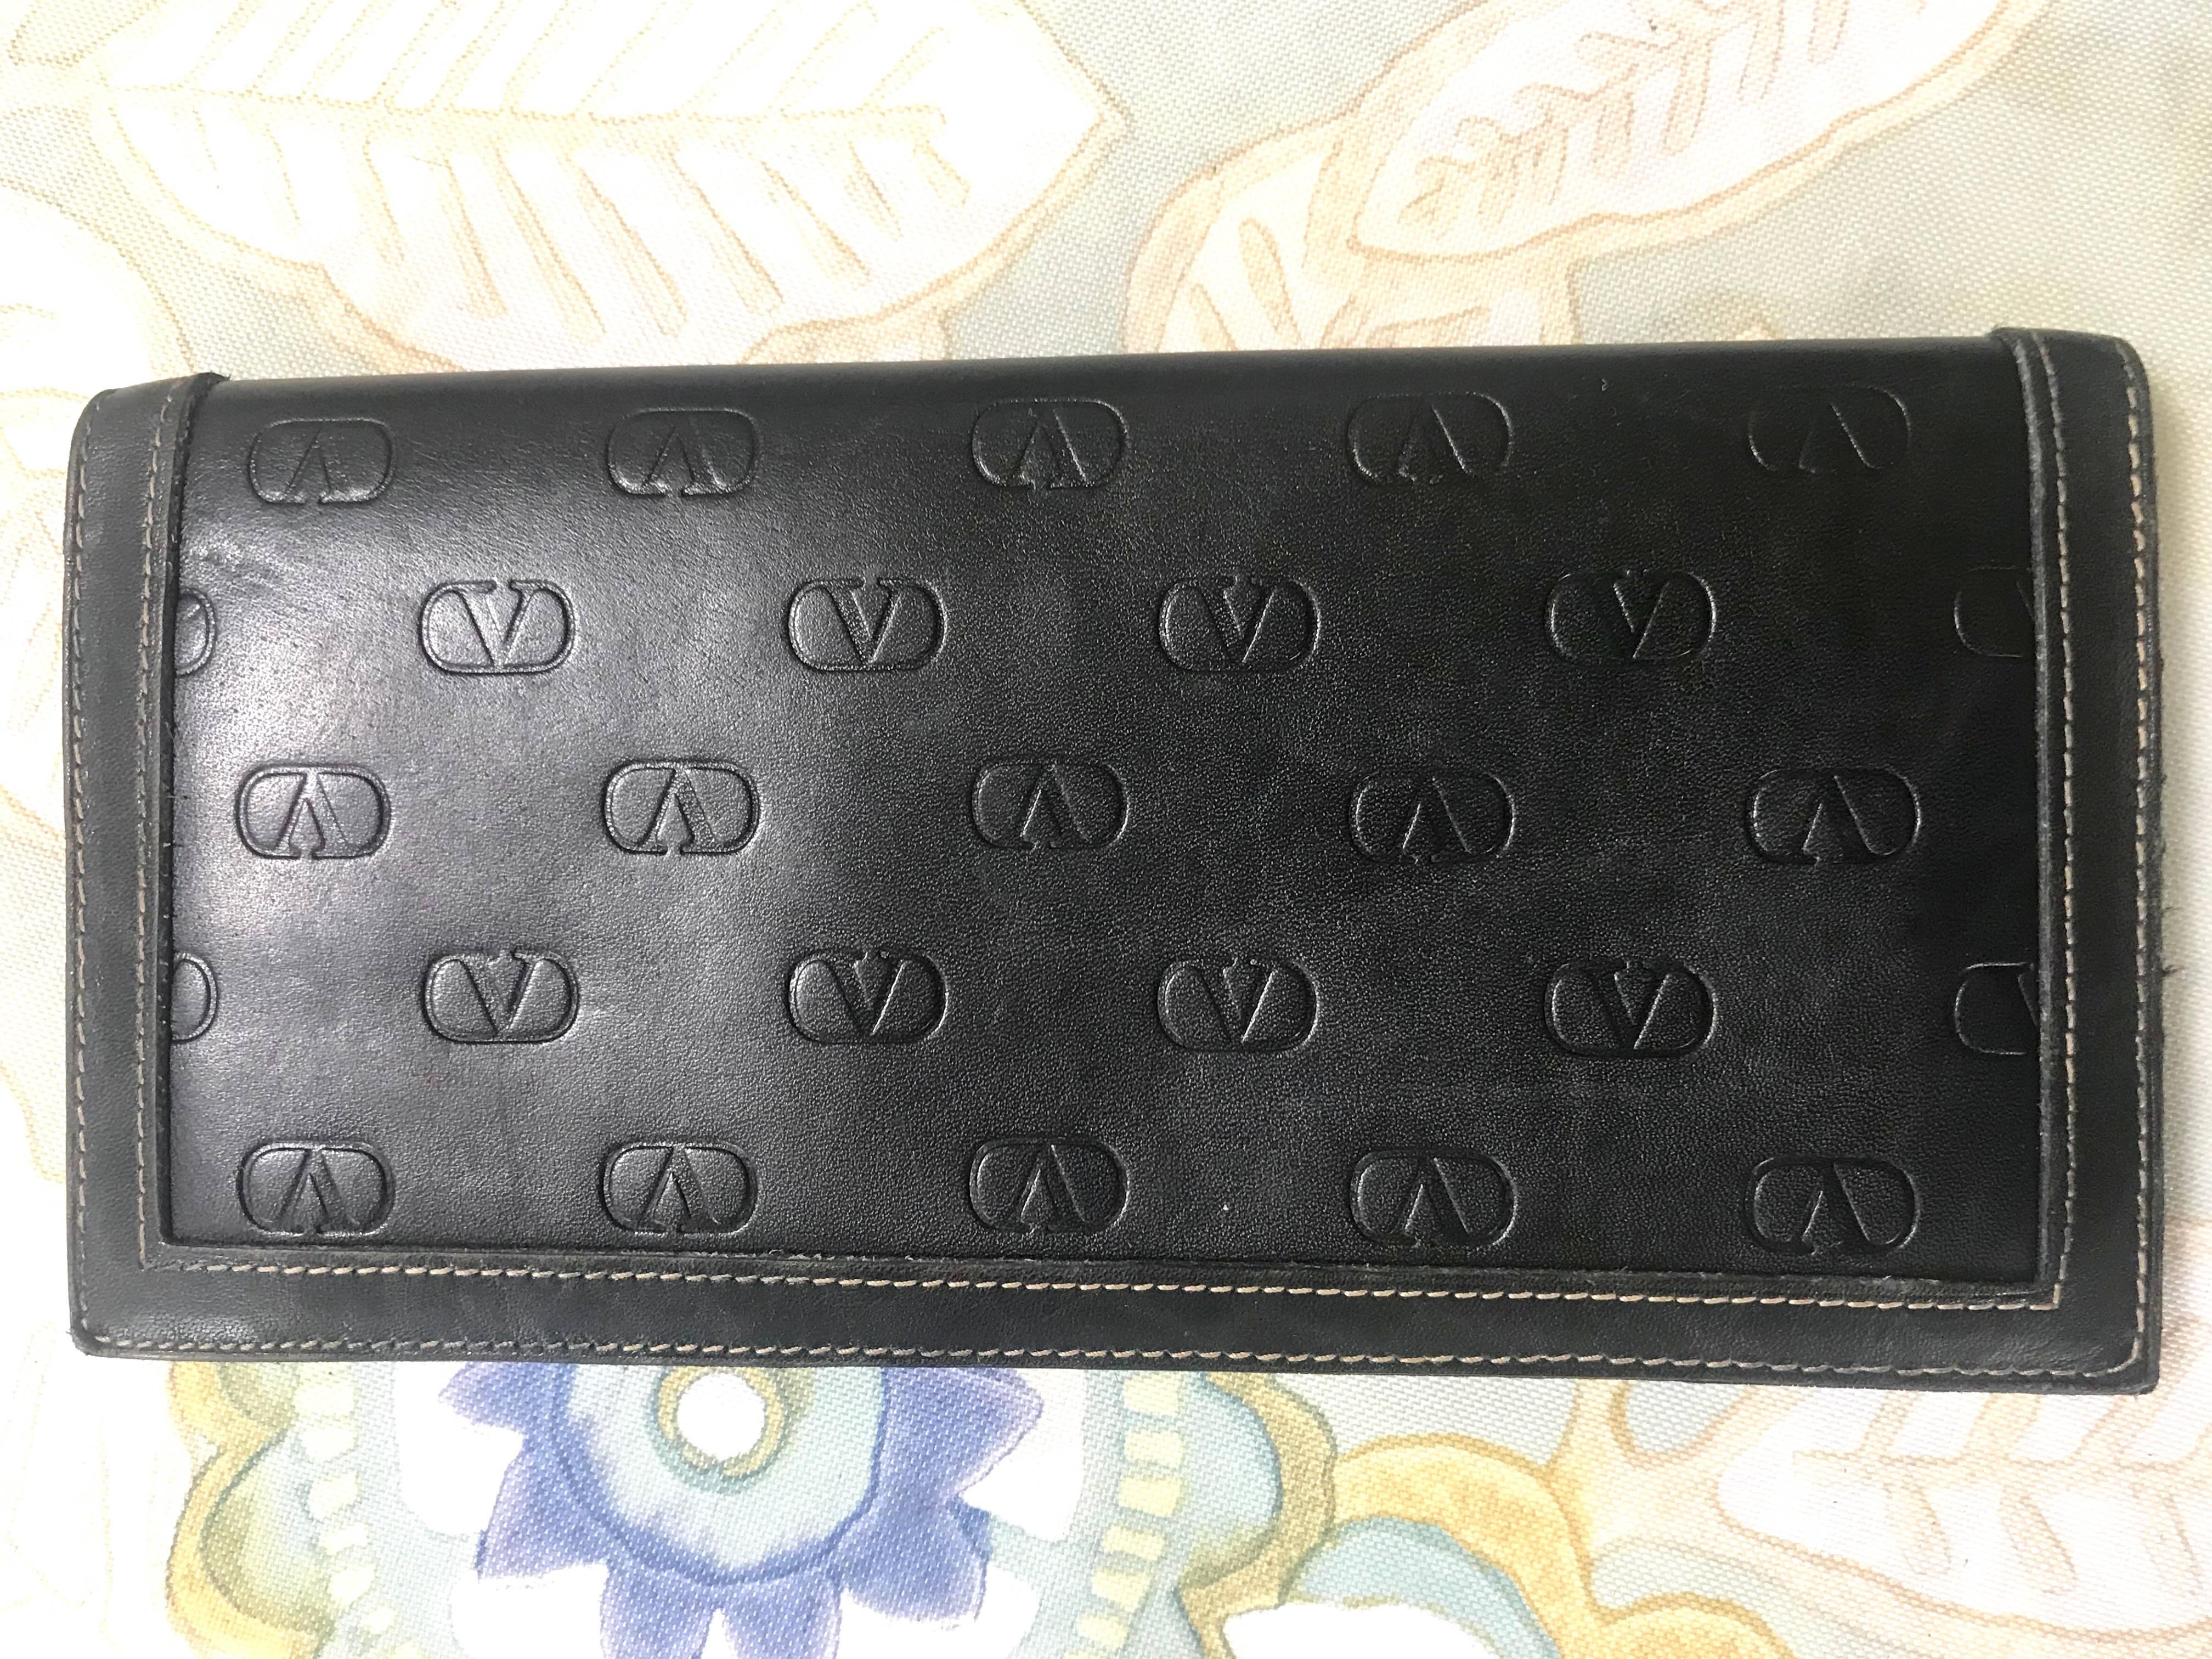 1980s. Vintage Valentino black leather long wallet with beige stitches and all over embossed logo. Unisex use. Classic purse.
Introducing a vintage Valentino's classic black leather long wallet featuring its iconic V logo embossed all over pn both